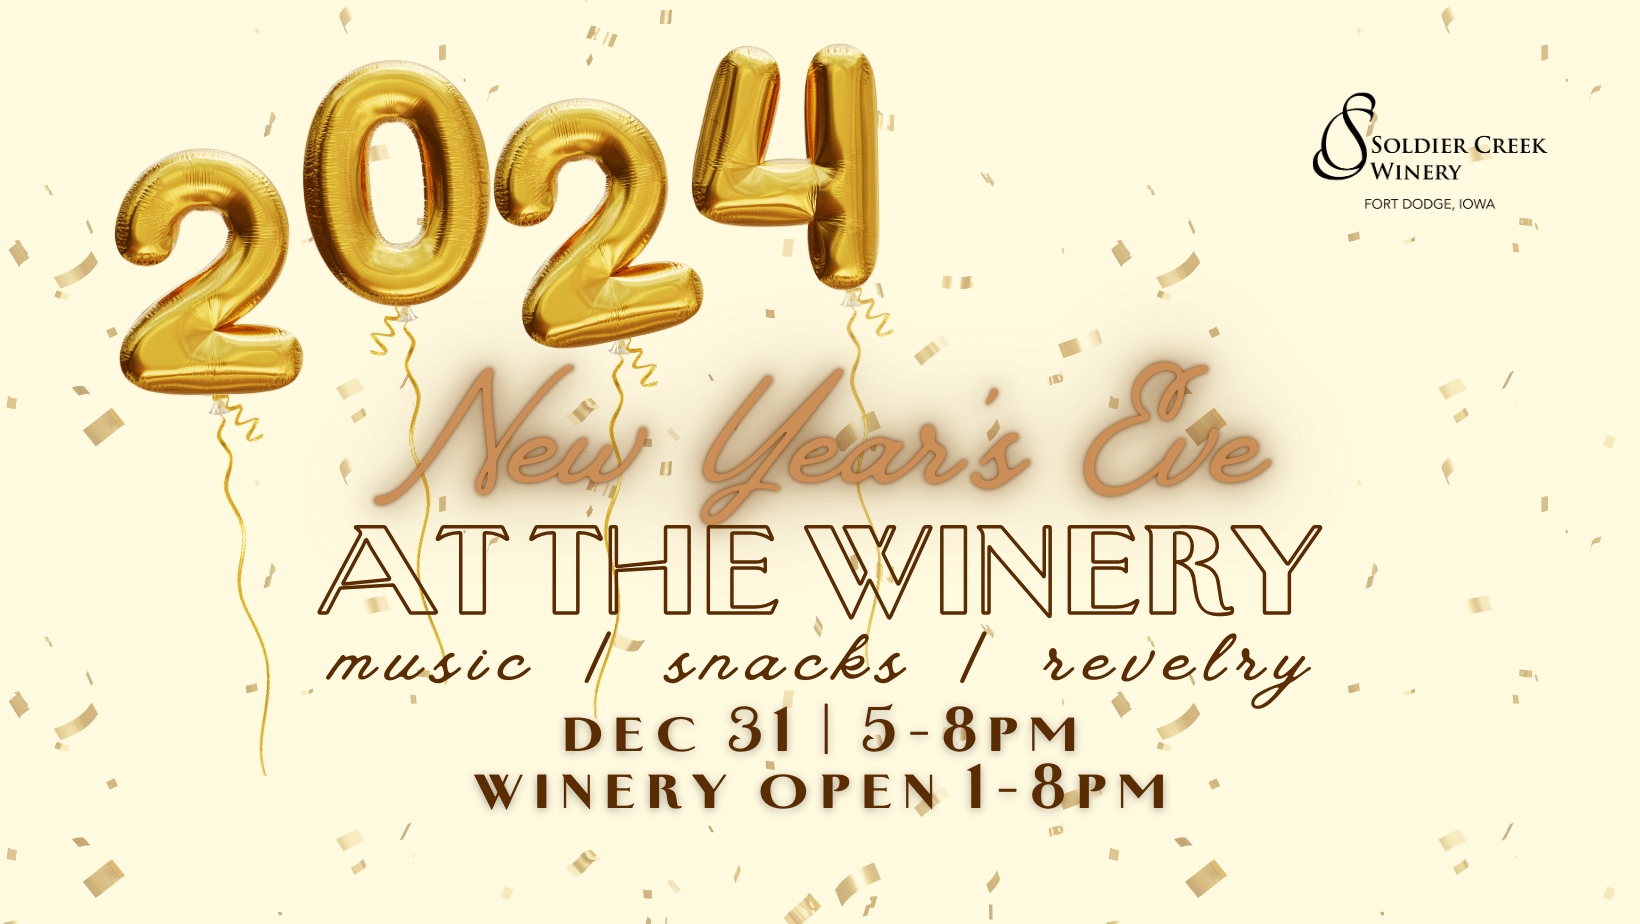 new years eve at the winery, music by gabriel alves and alex trevino, complimentary snack bar, festive hats and noisemakers, and revelry. sunday, dec 31 from 5-8pm at soldier creek winery.